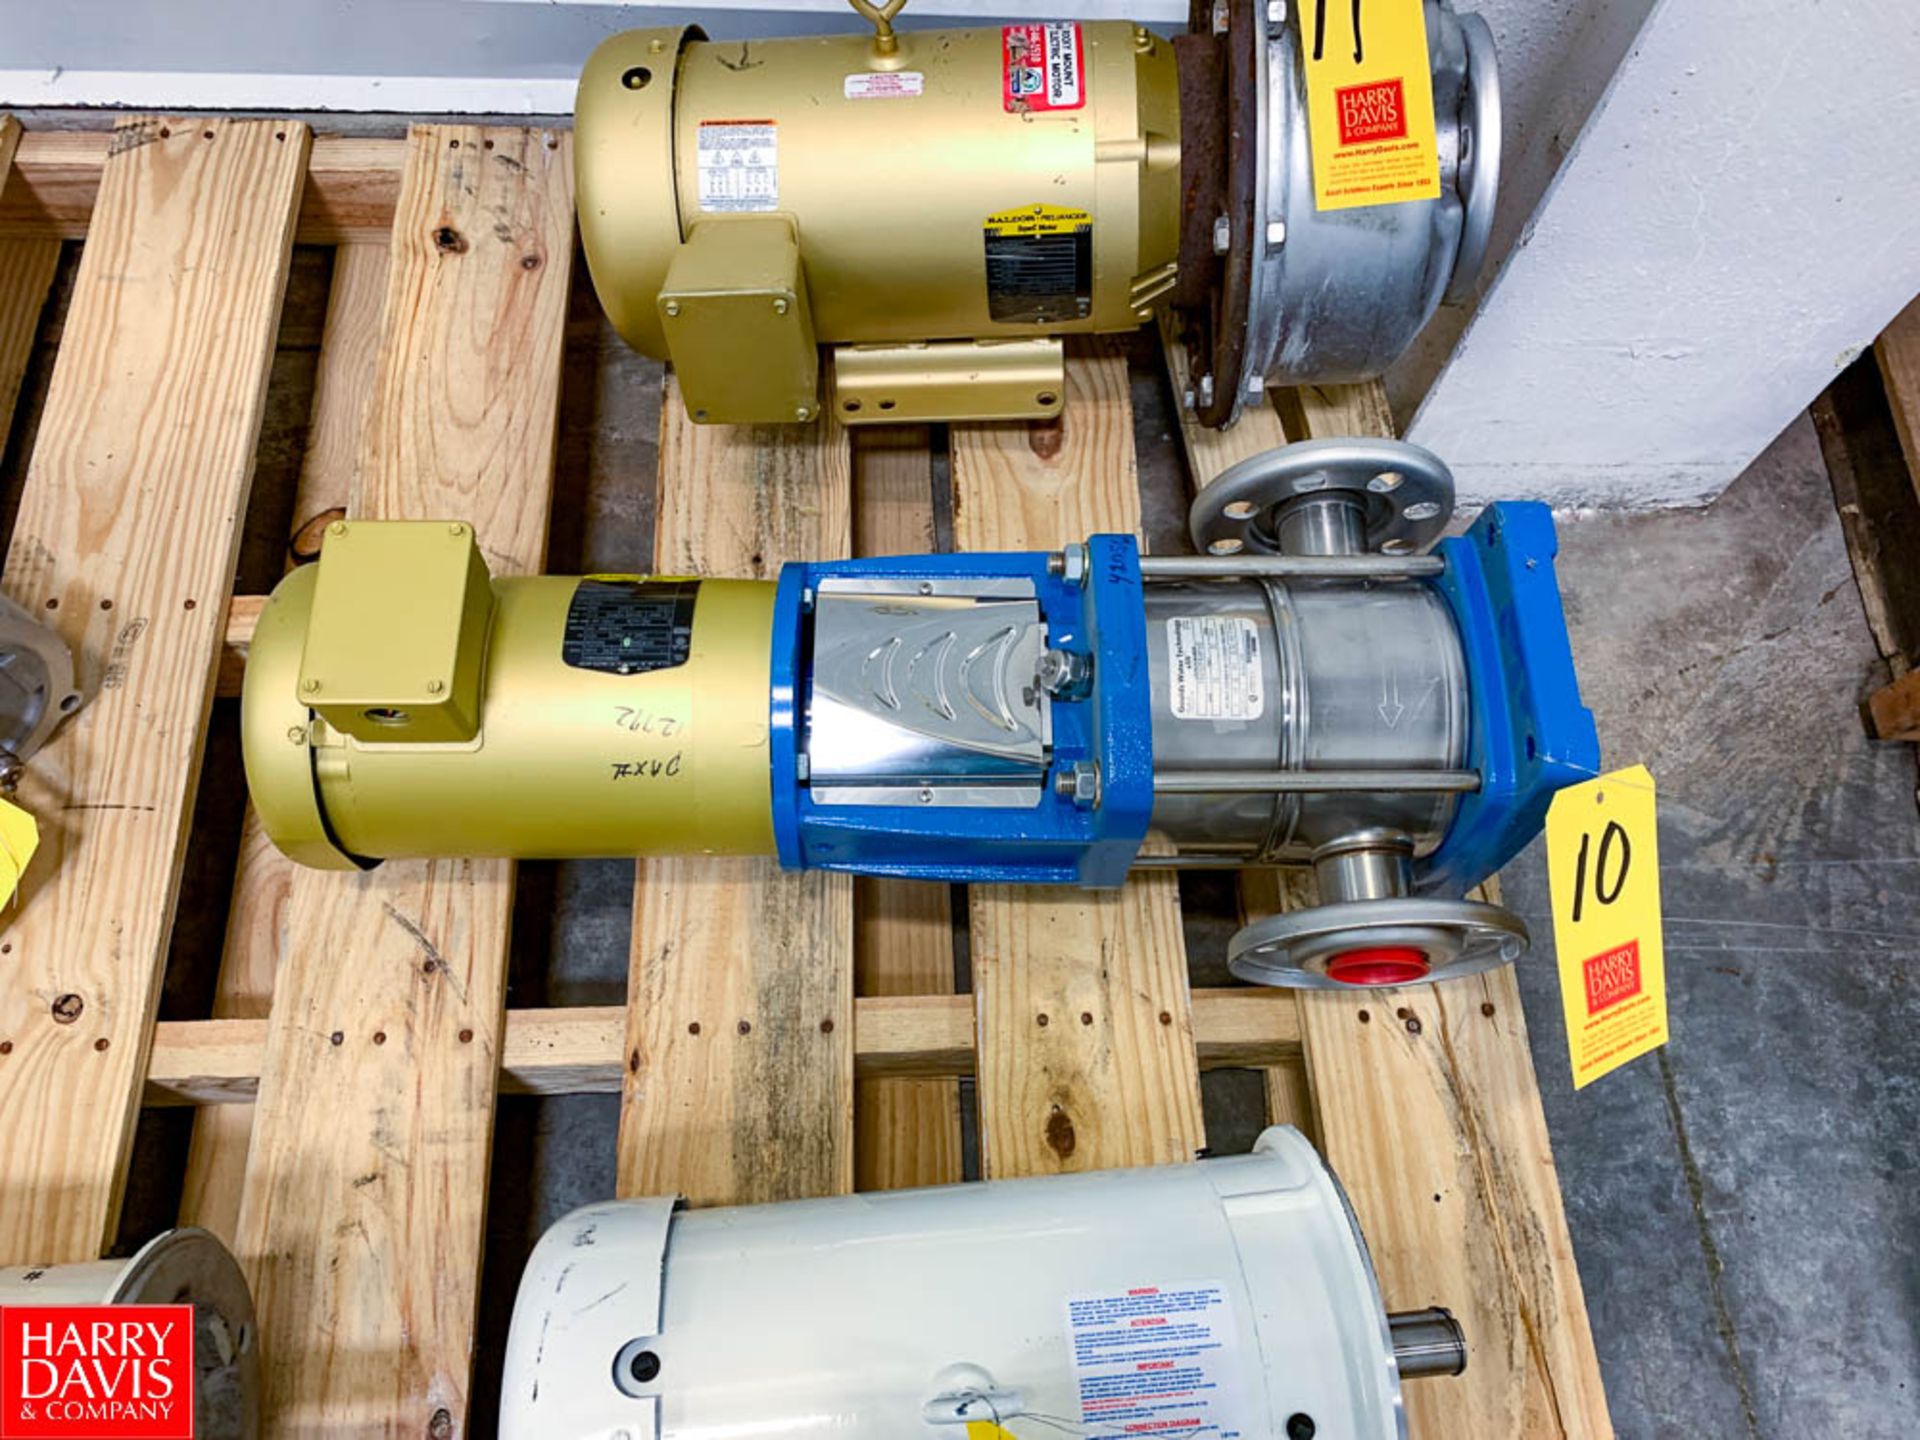 NEW Goulds Water Pump Model: 105V2FE4F60 Technology with 2 HP 3,450 RPM Motor Rigging Fee: $ 50